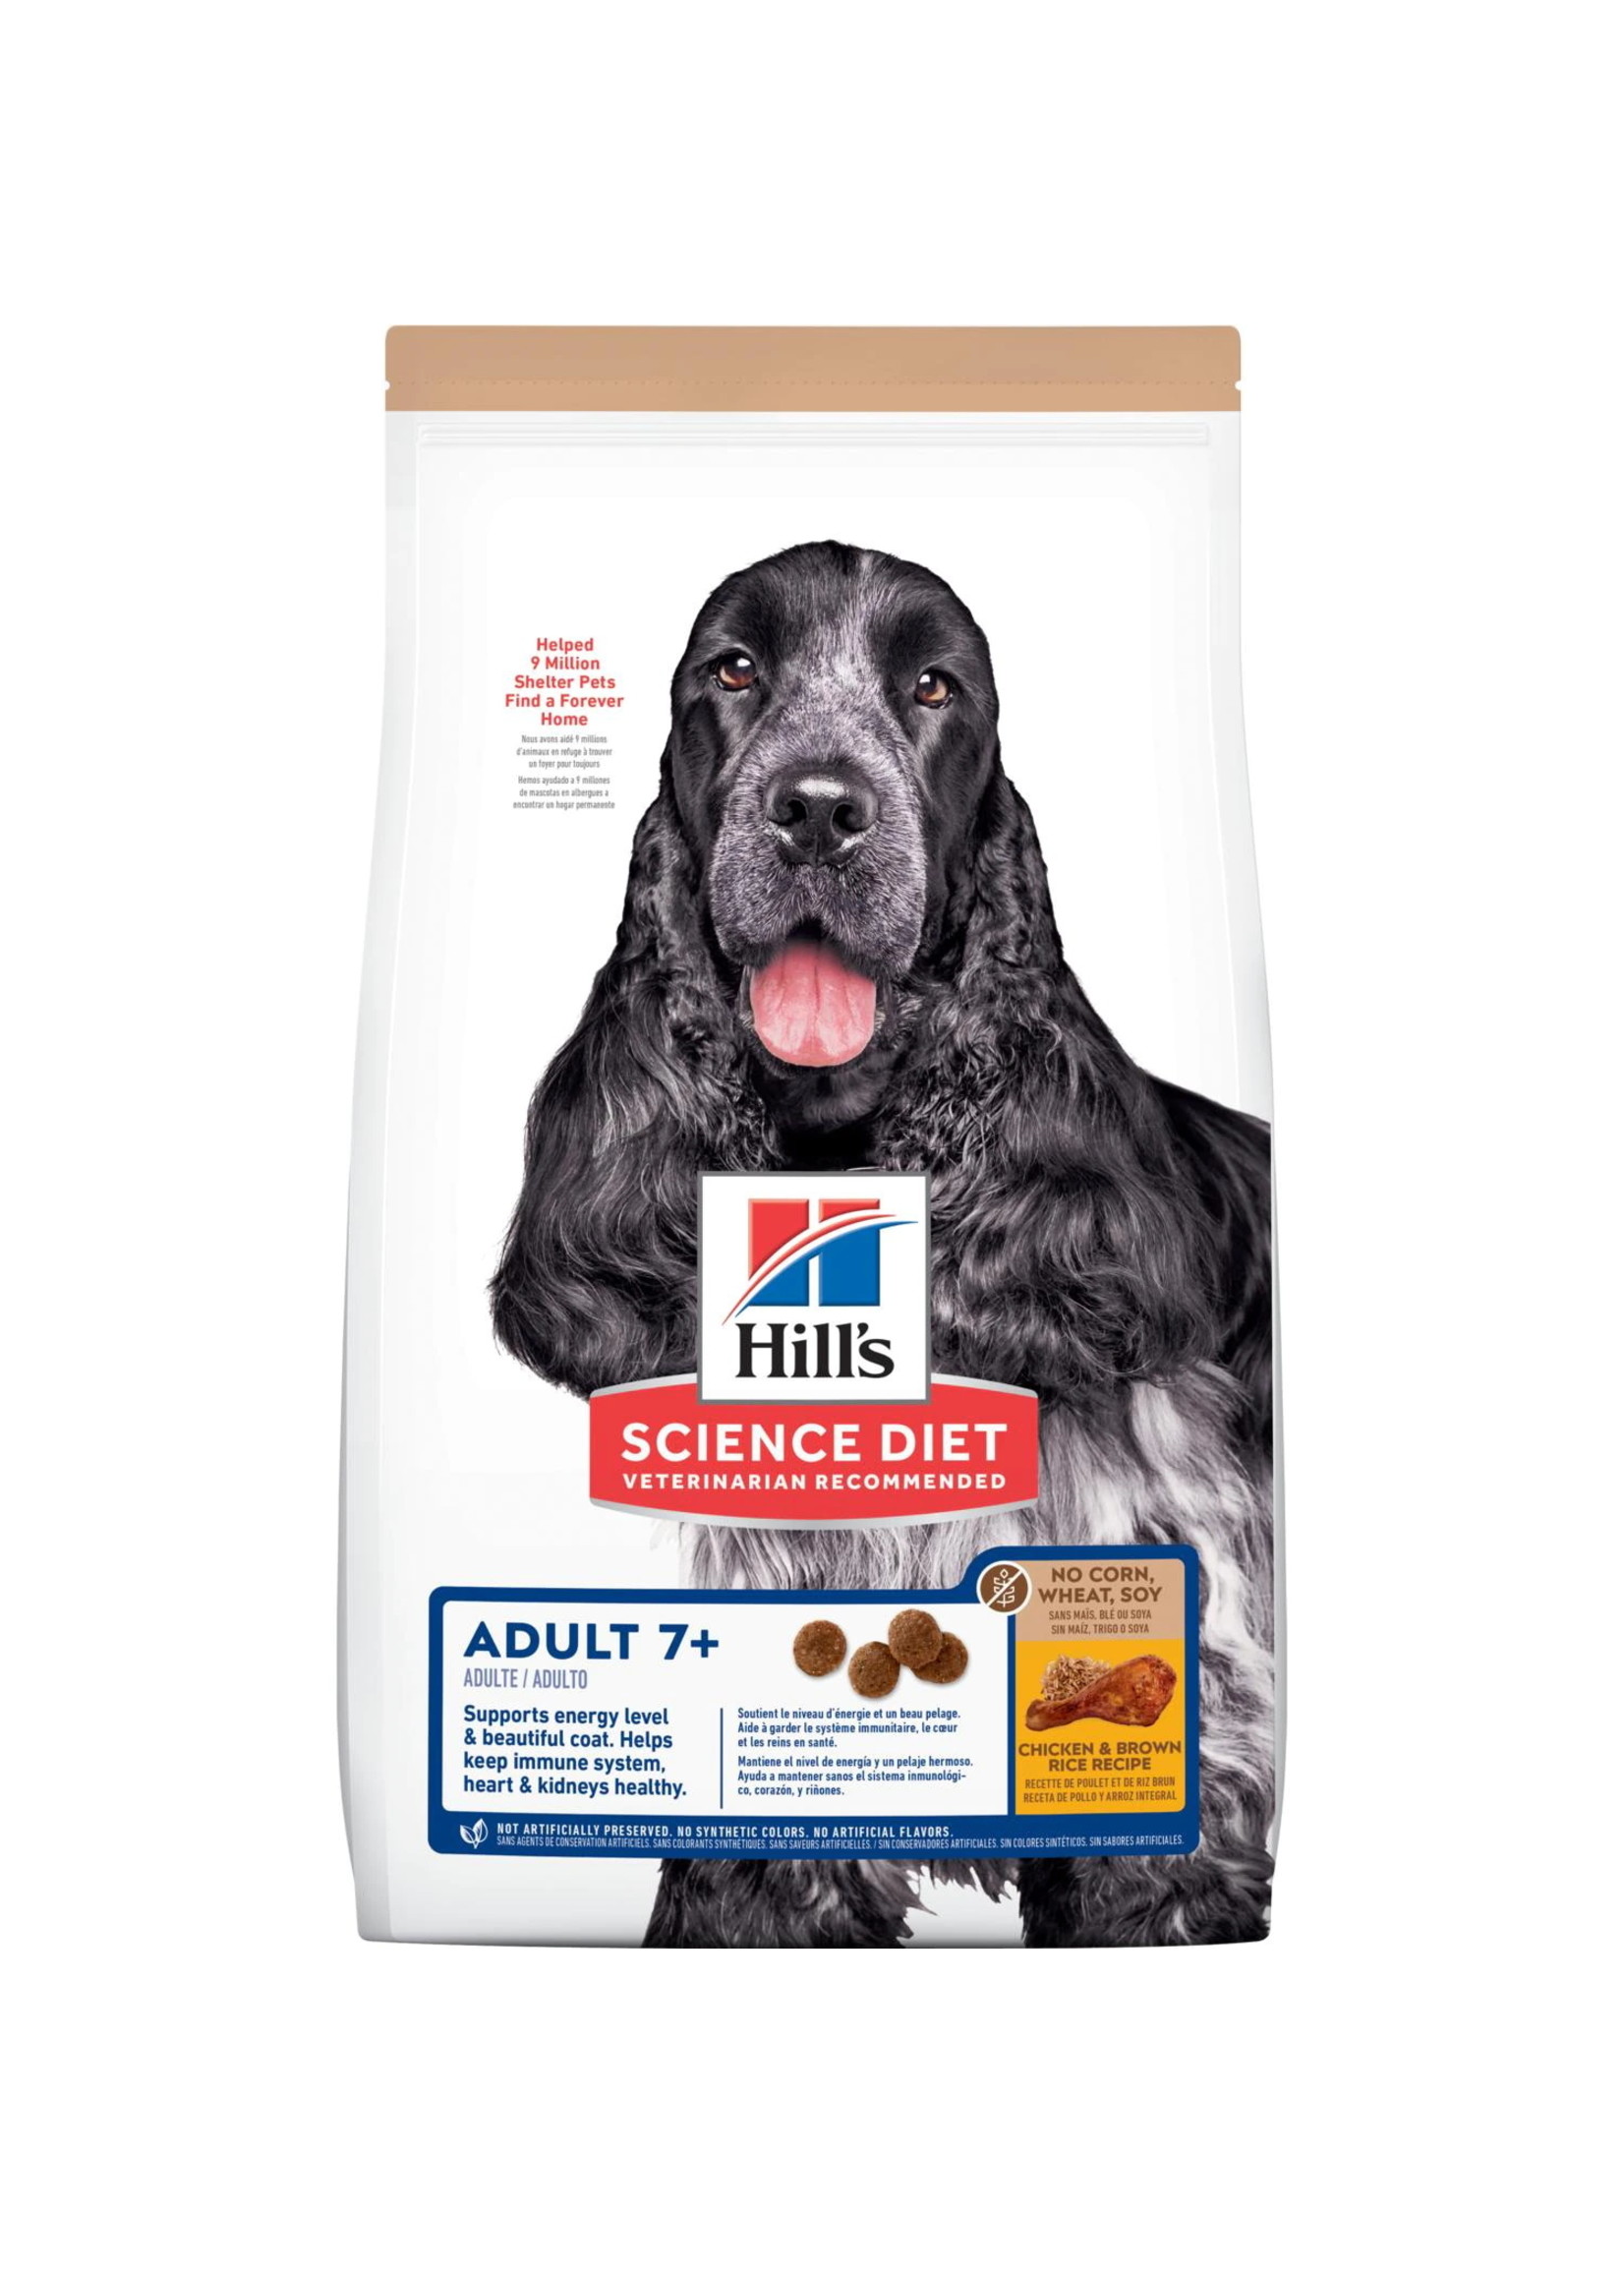 Hill's Science Diet Hill's Science Diet Adult 7+ No Corn, Wheat or Soy Dog Food